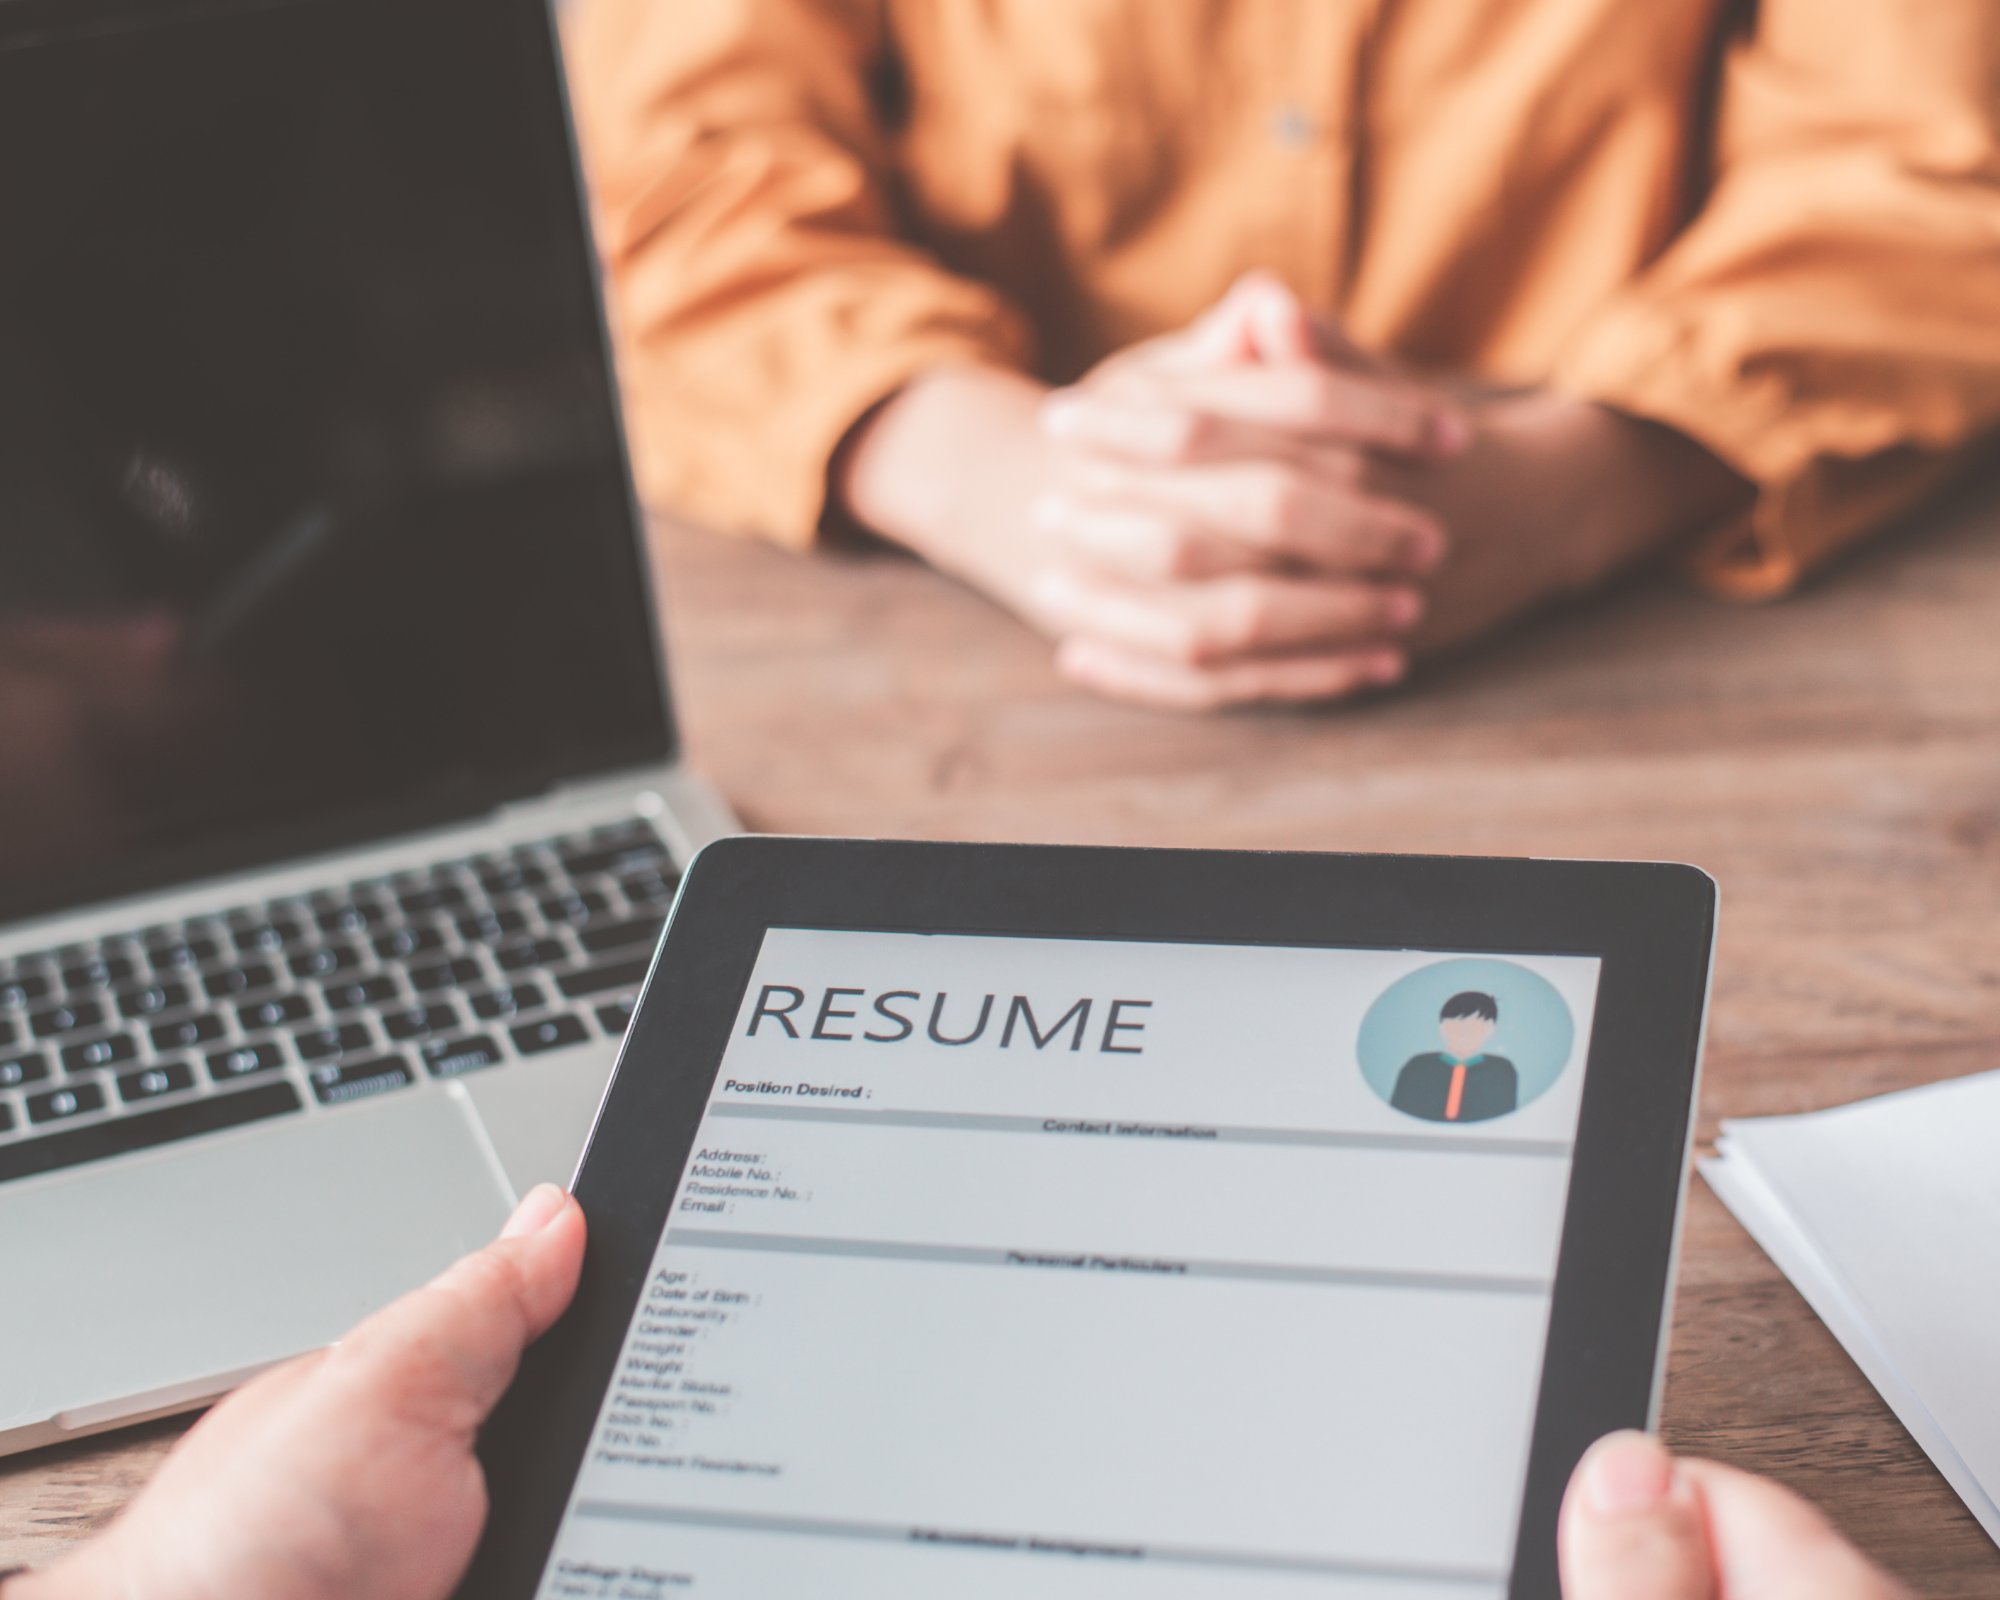 How To Make An Electronic Resume